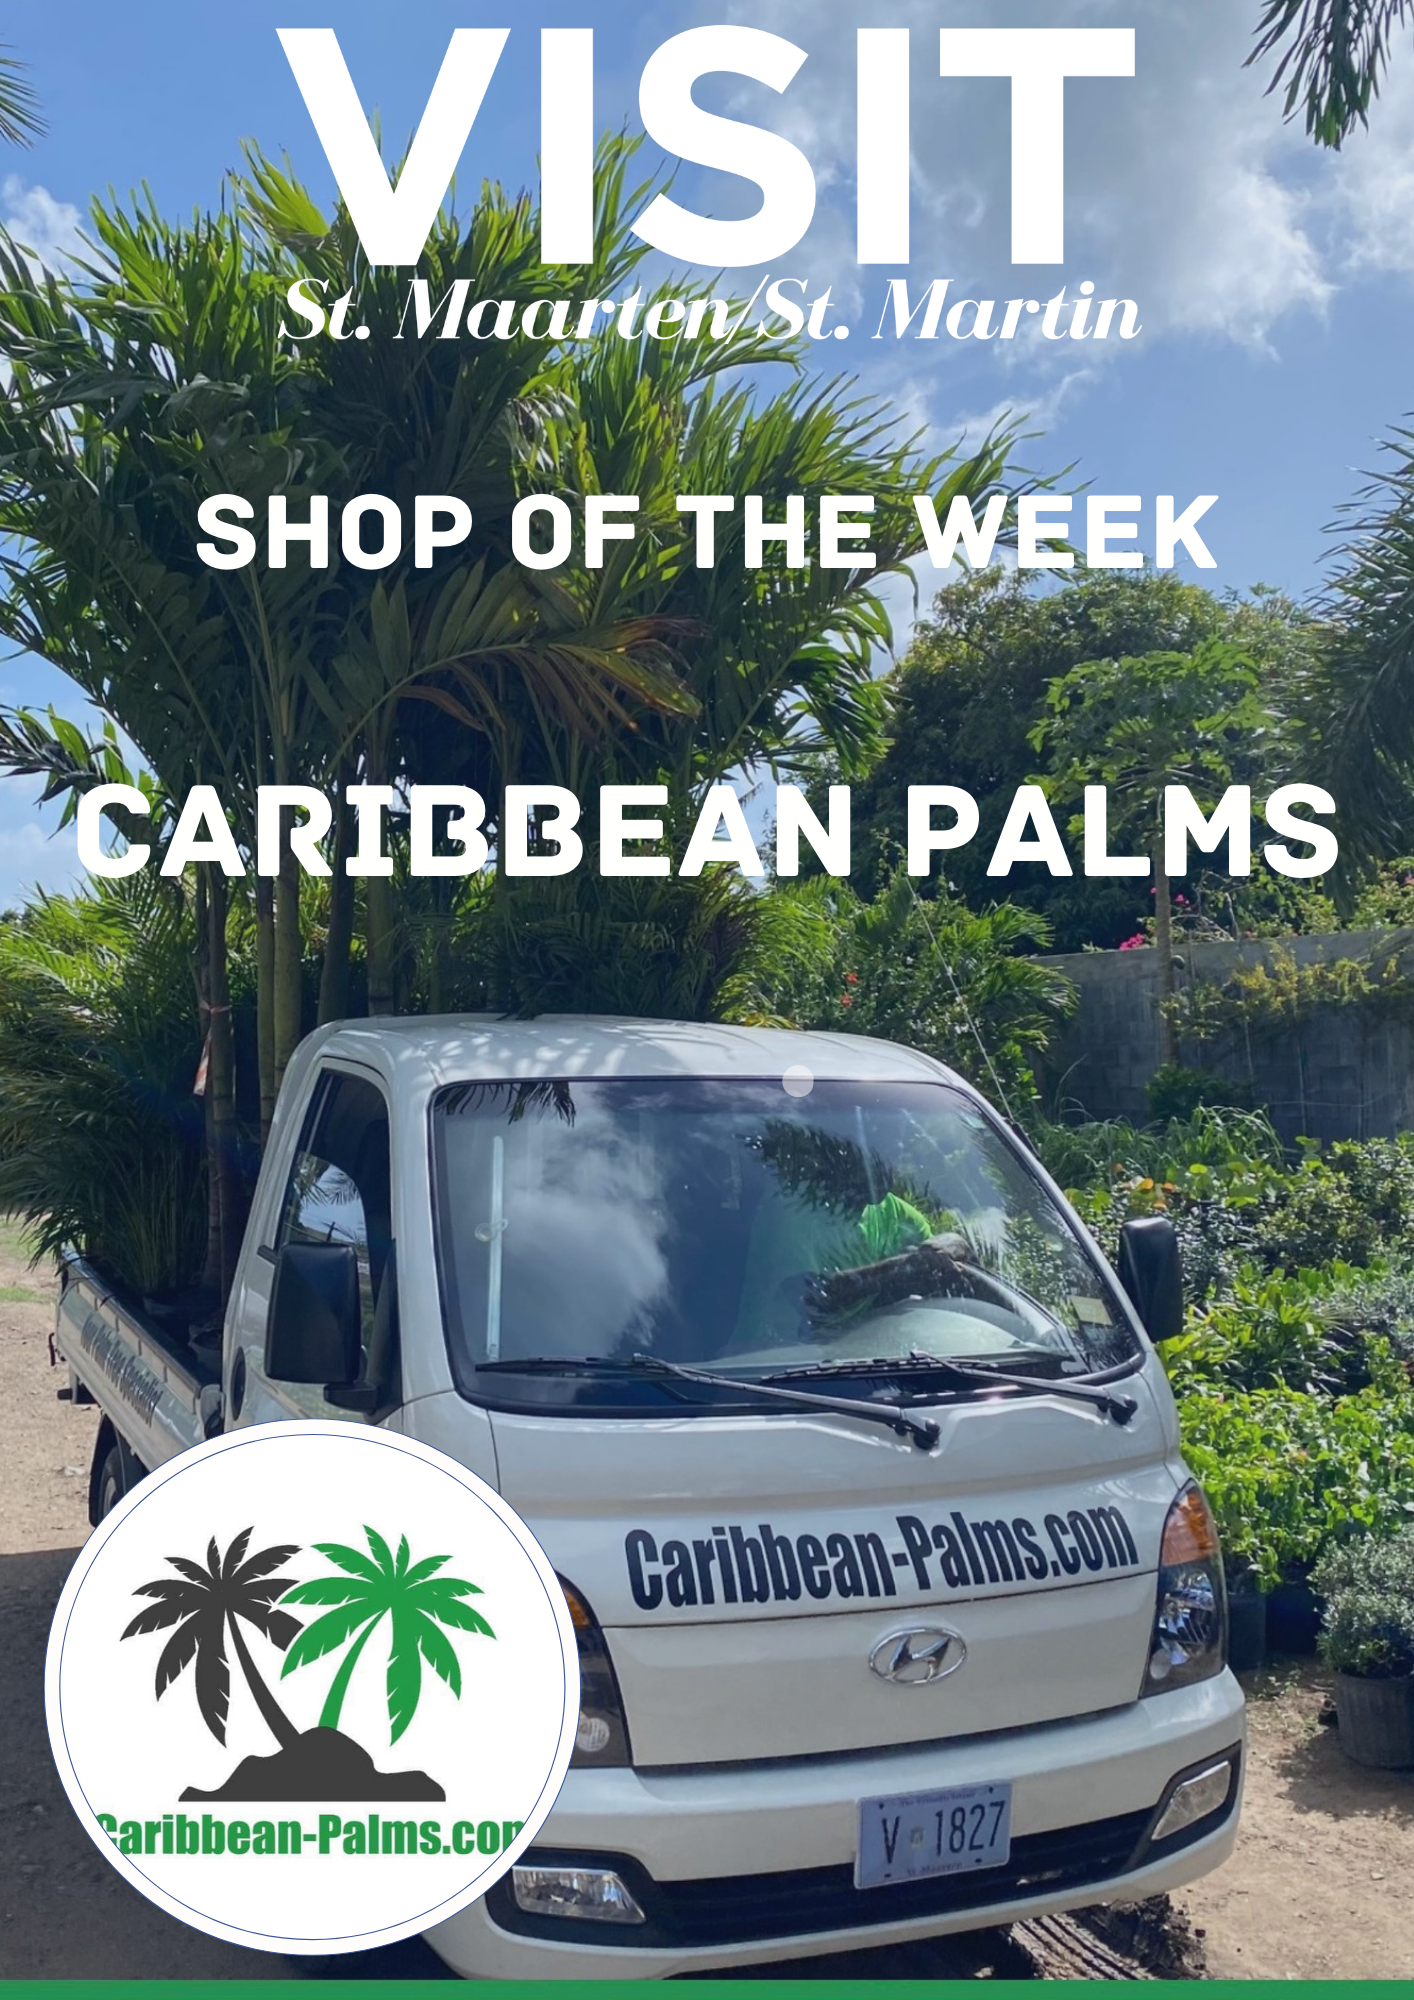 Caribbean Palms Shop in the week in cole bay sxm